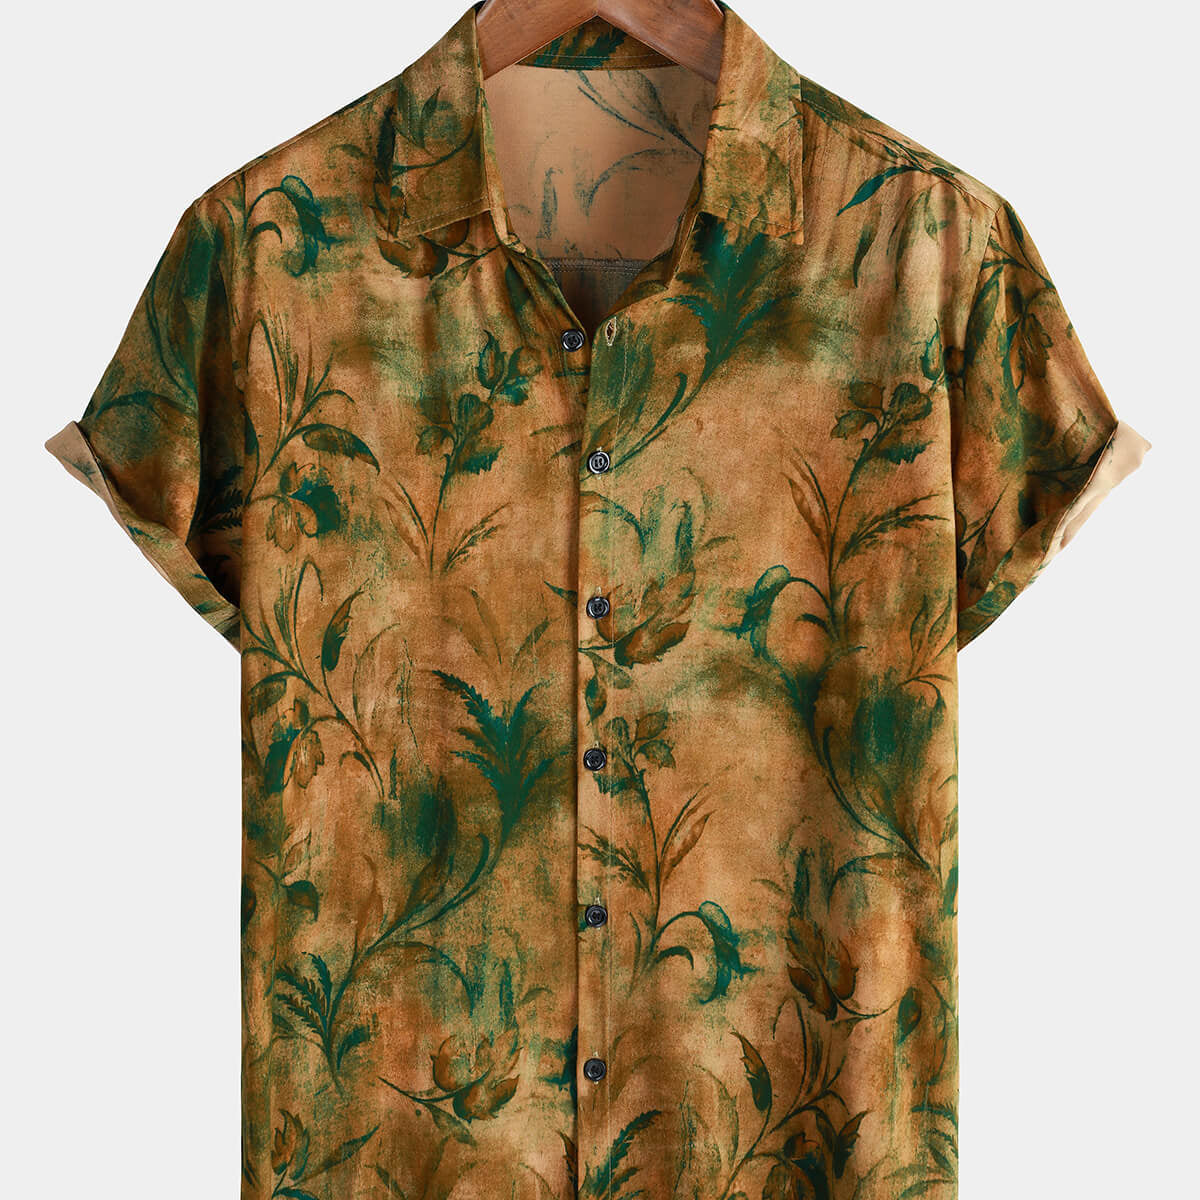 Men's Vintage Holiday Casual Summer Floral Short Sleeve Button Up Shirt